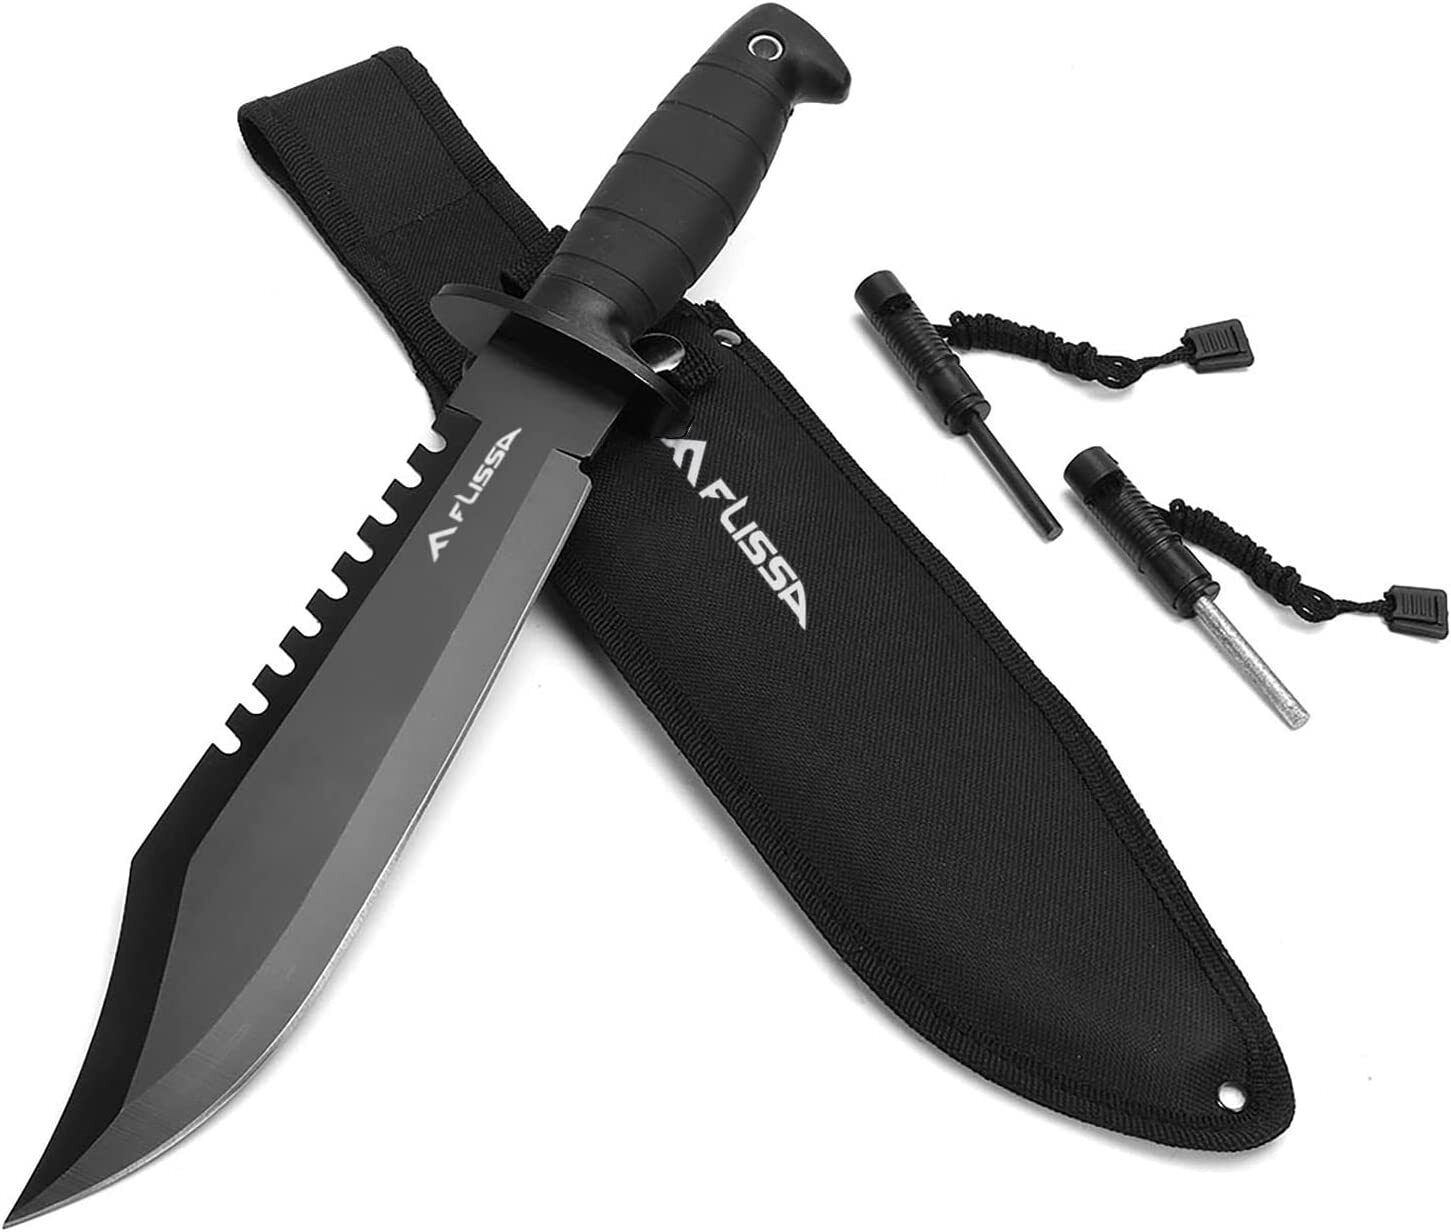 FLISSA Survival Hunting Knife w/Sheath 15 inch Fixed Blade Tactical Bowie Knife